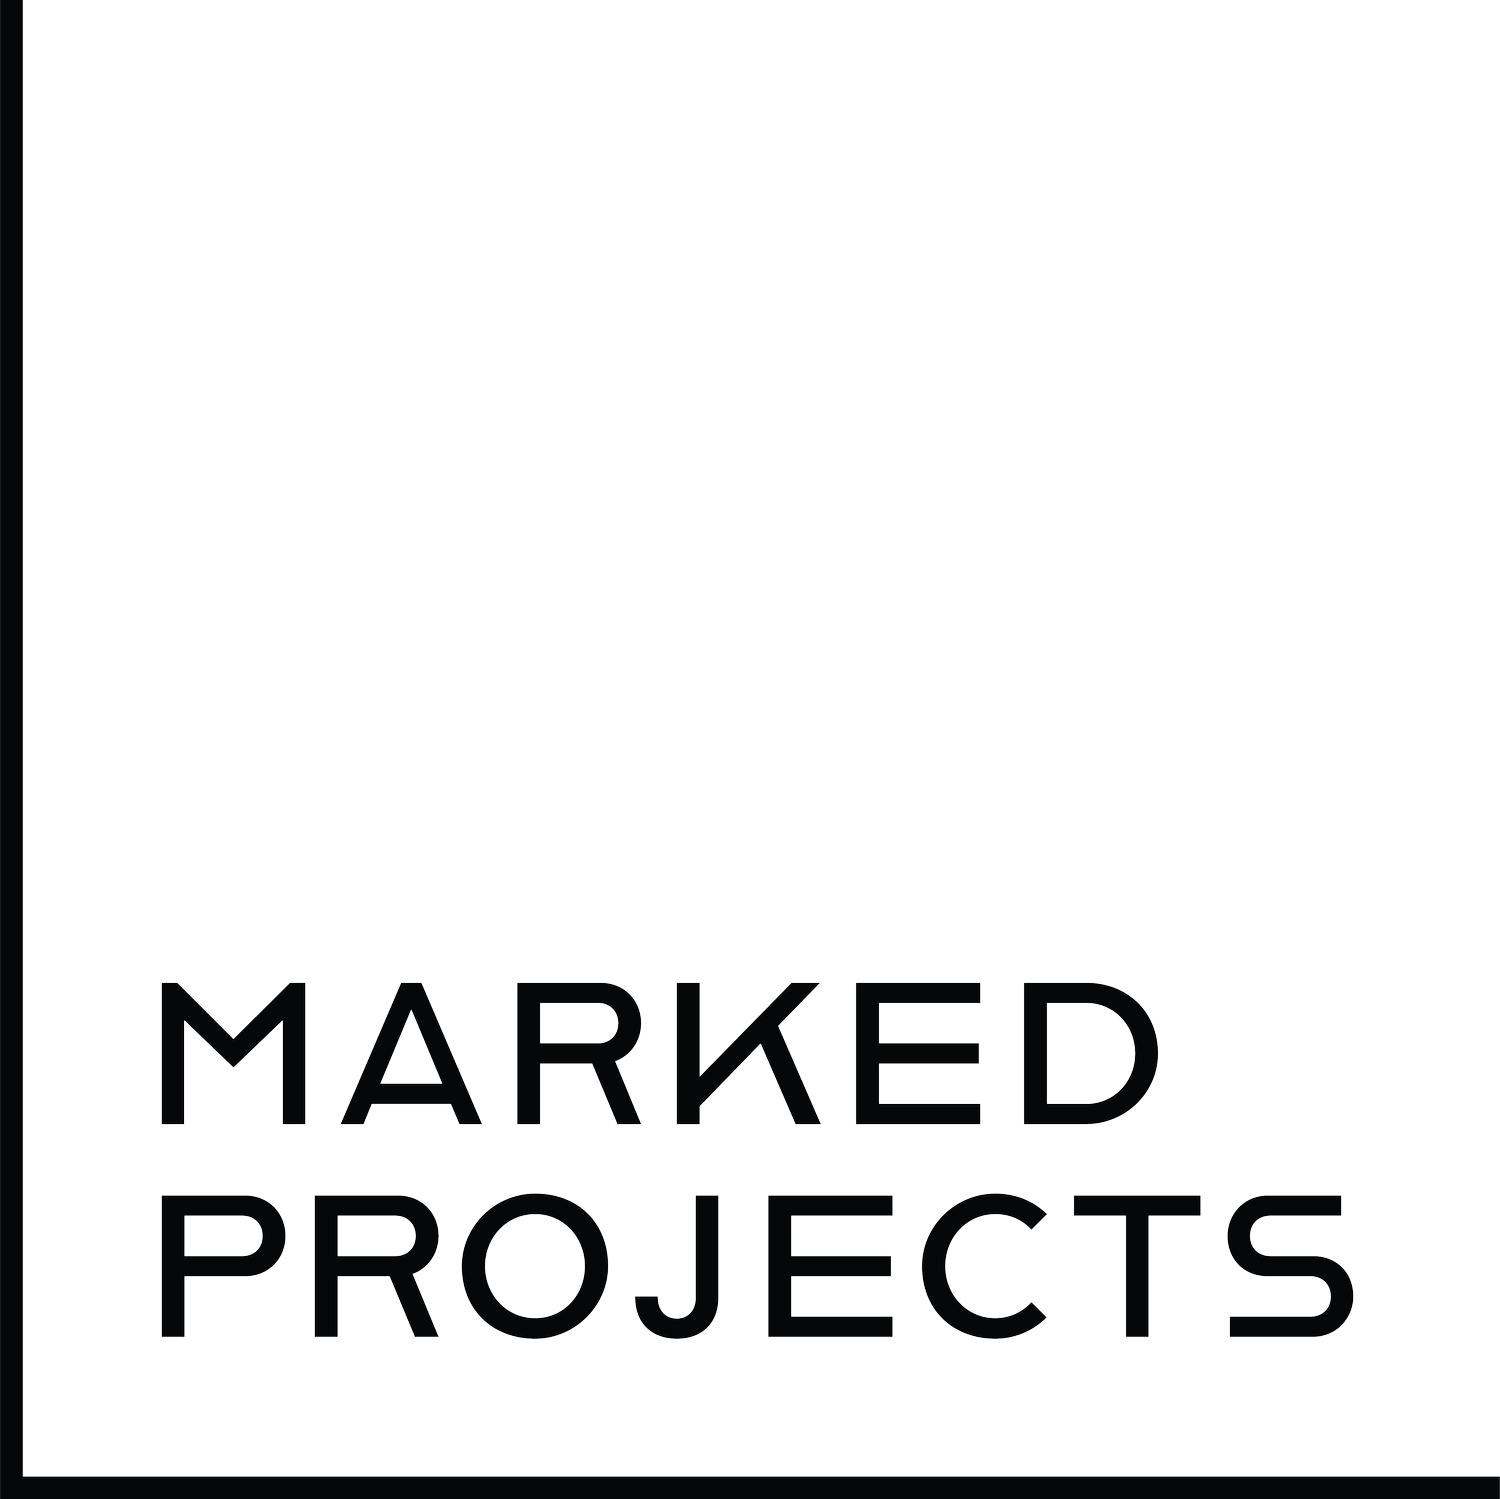 Marked Projects